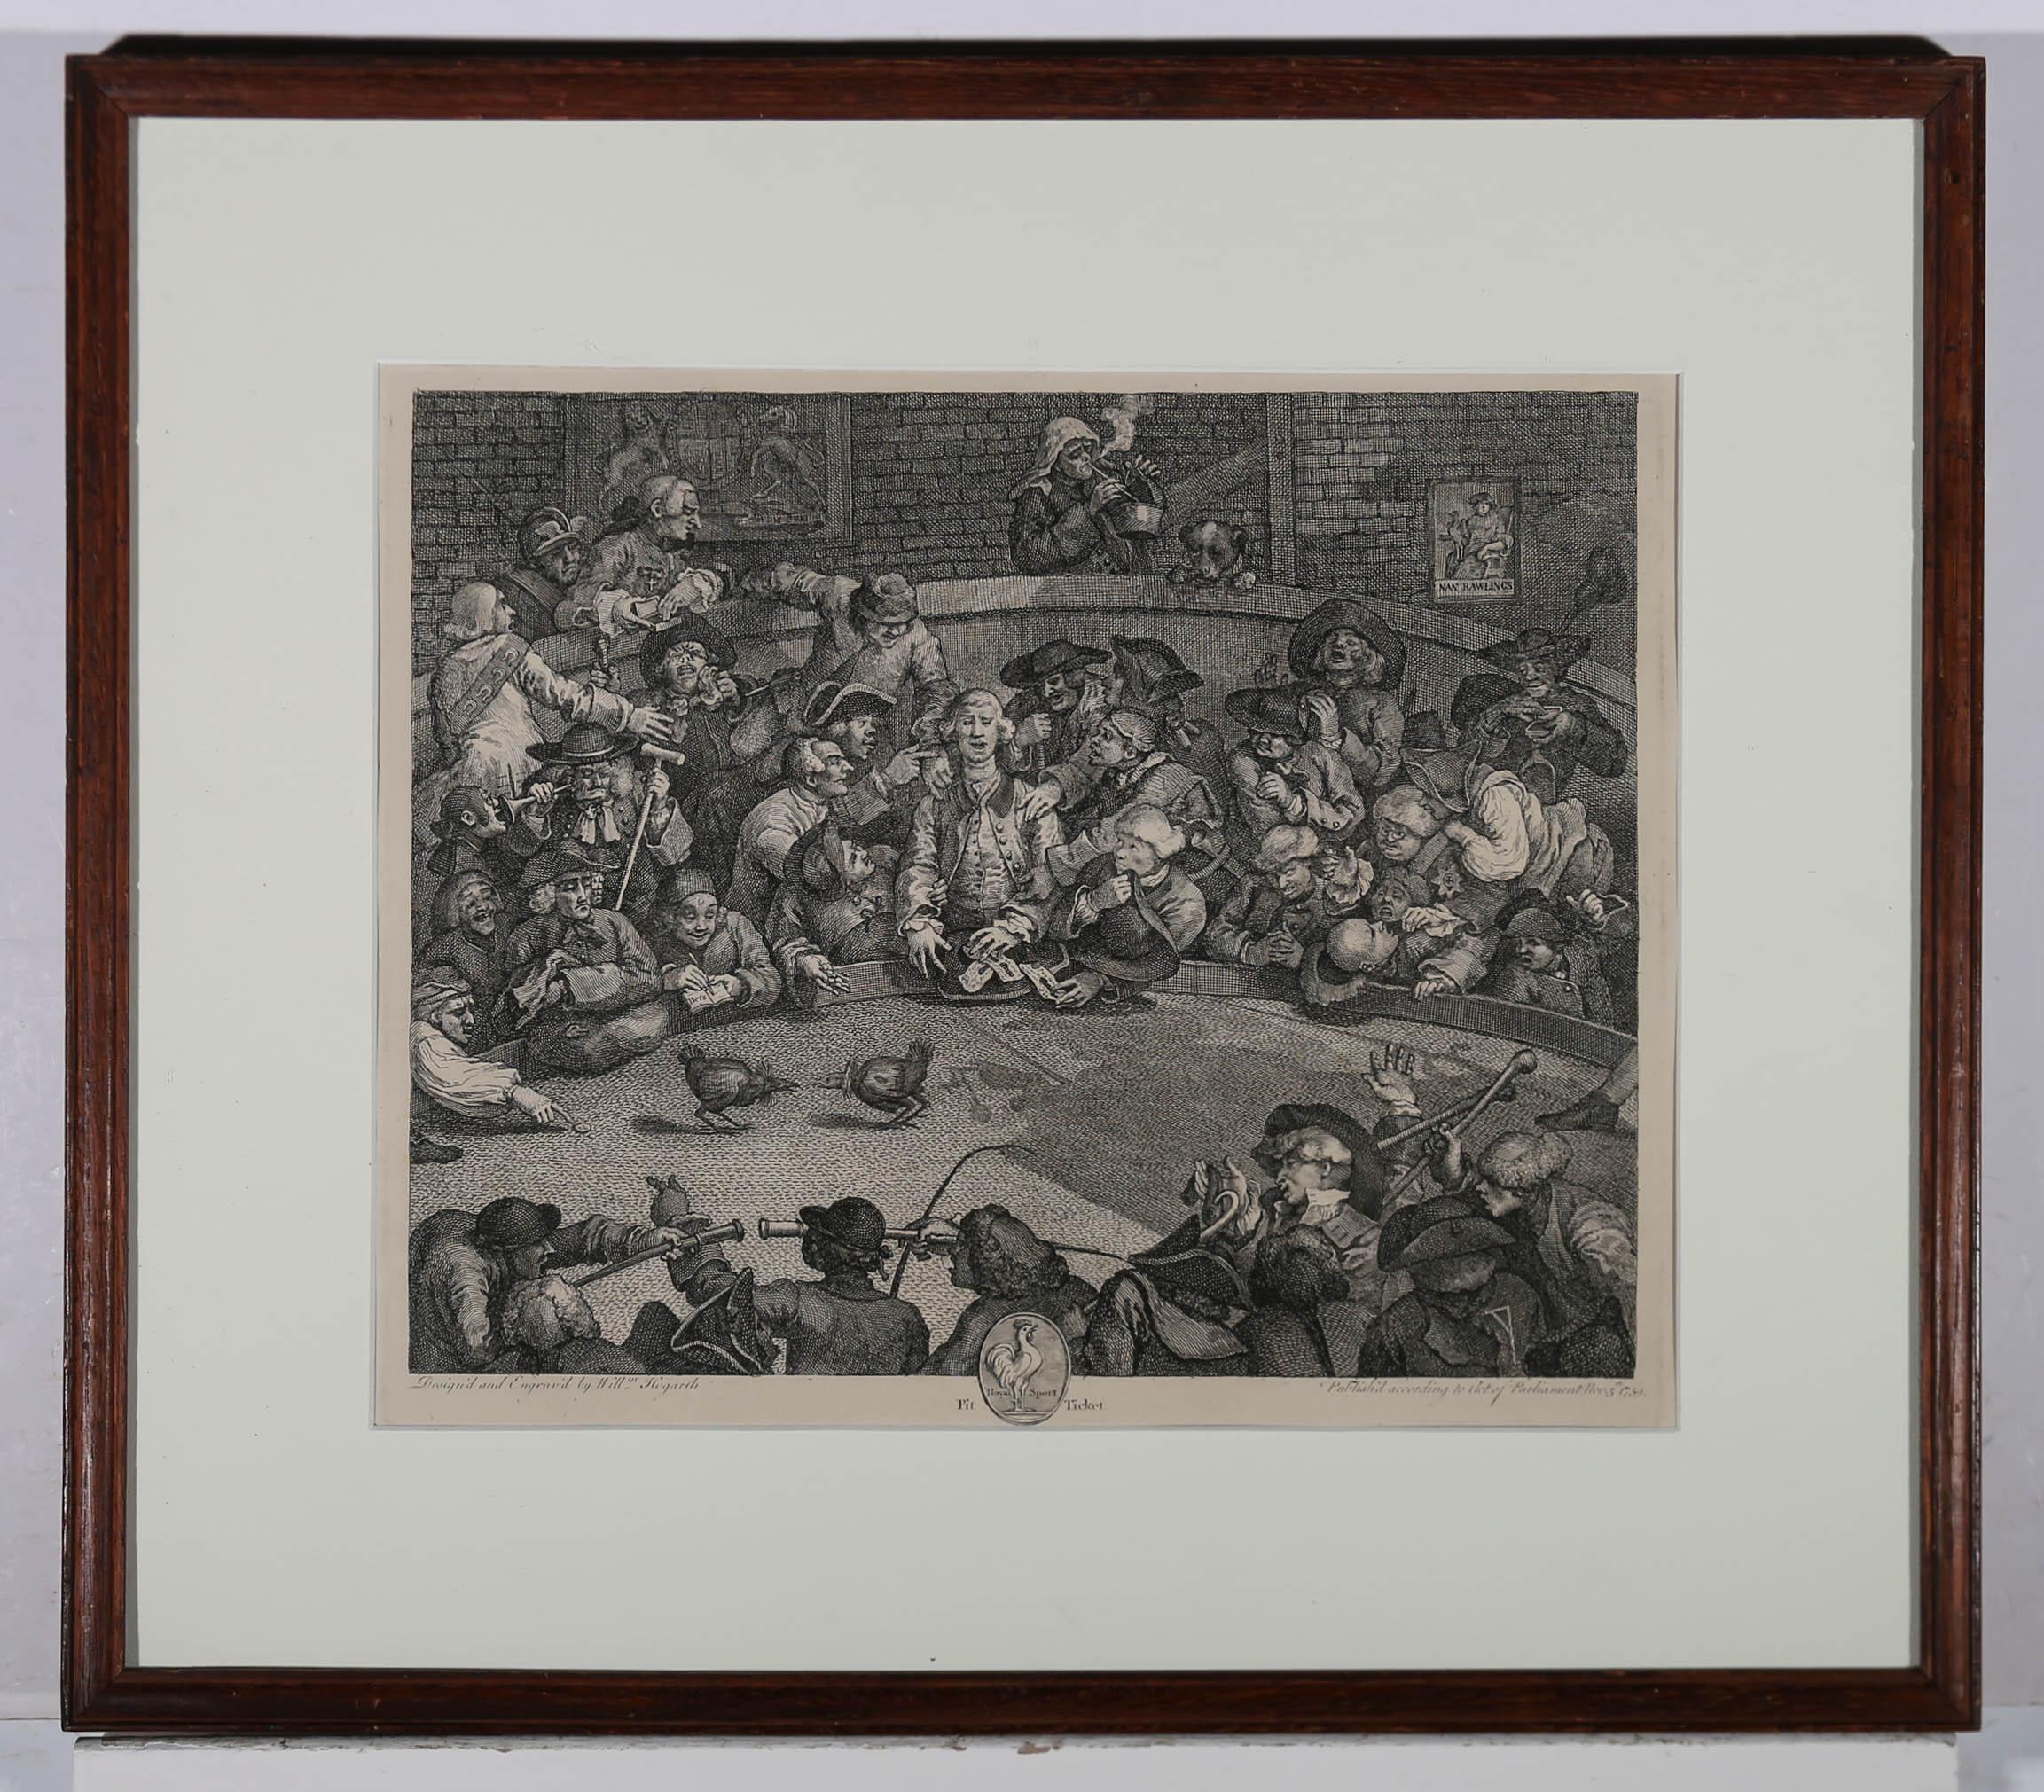 A fine 19th Century restrike of the original plate by William Hogarth. The scene shows a rowdy pit around a cock fighting ring, with onlookers taking and placing bets, shouting and causing a general rabble. The artist's name, date, title and